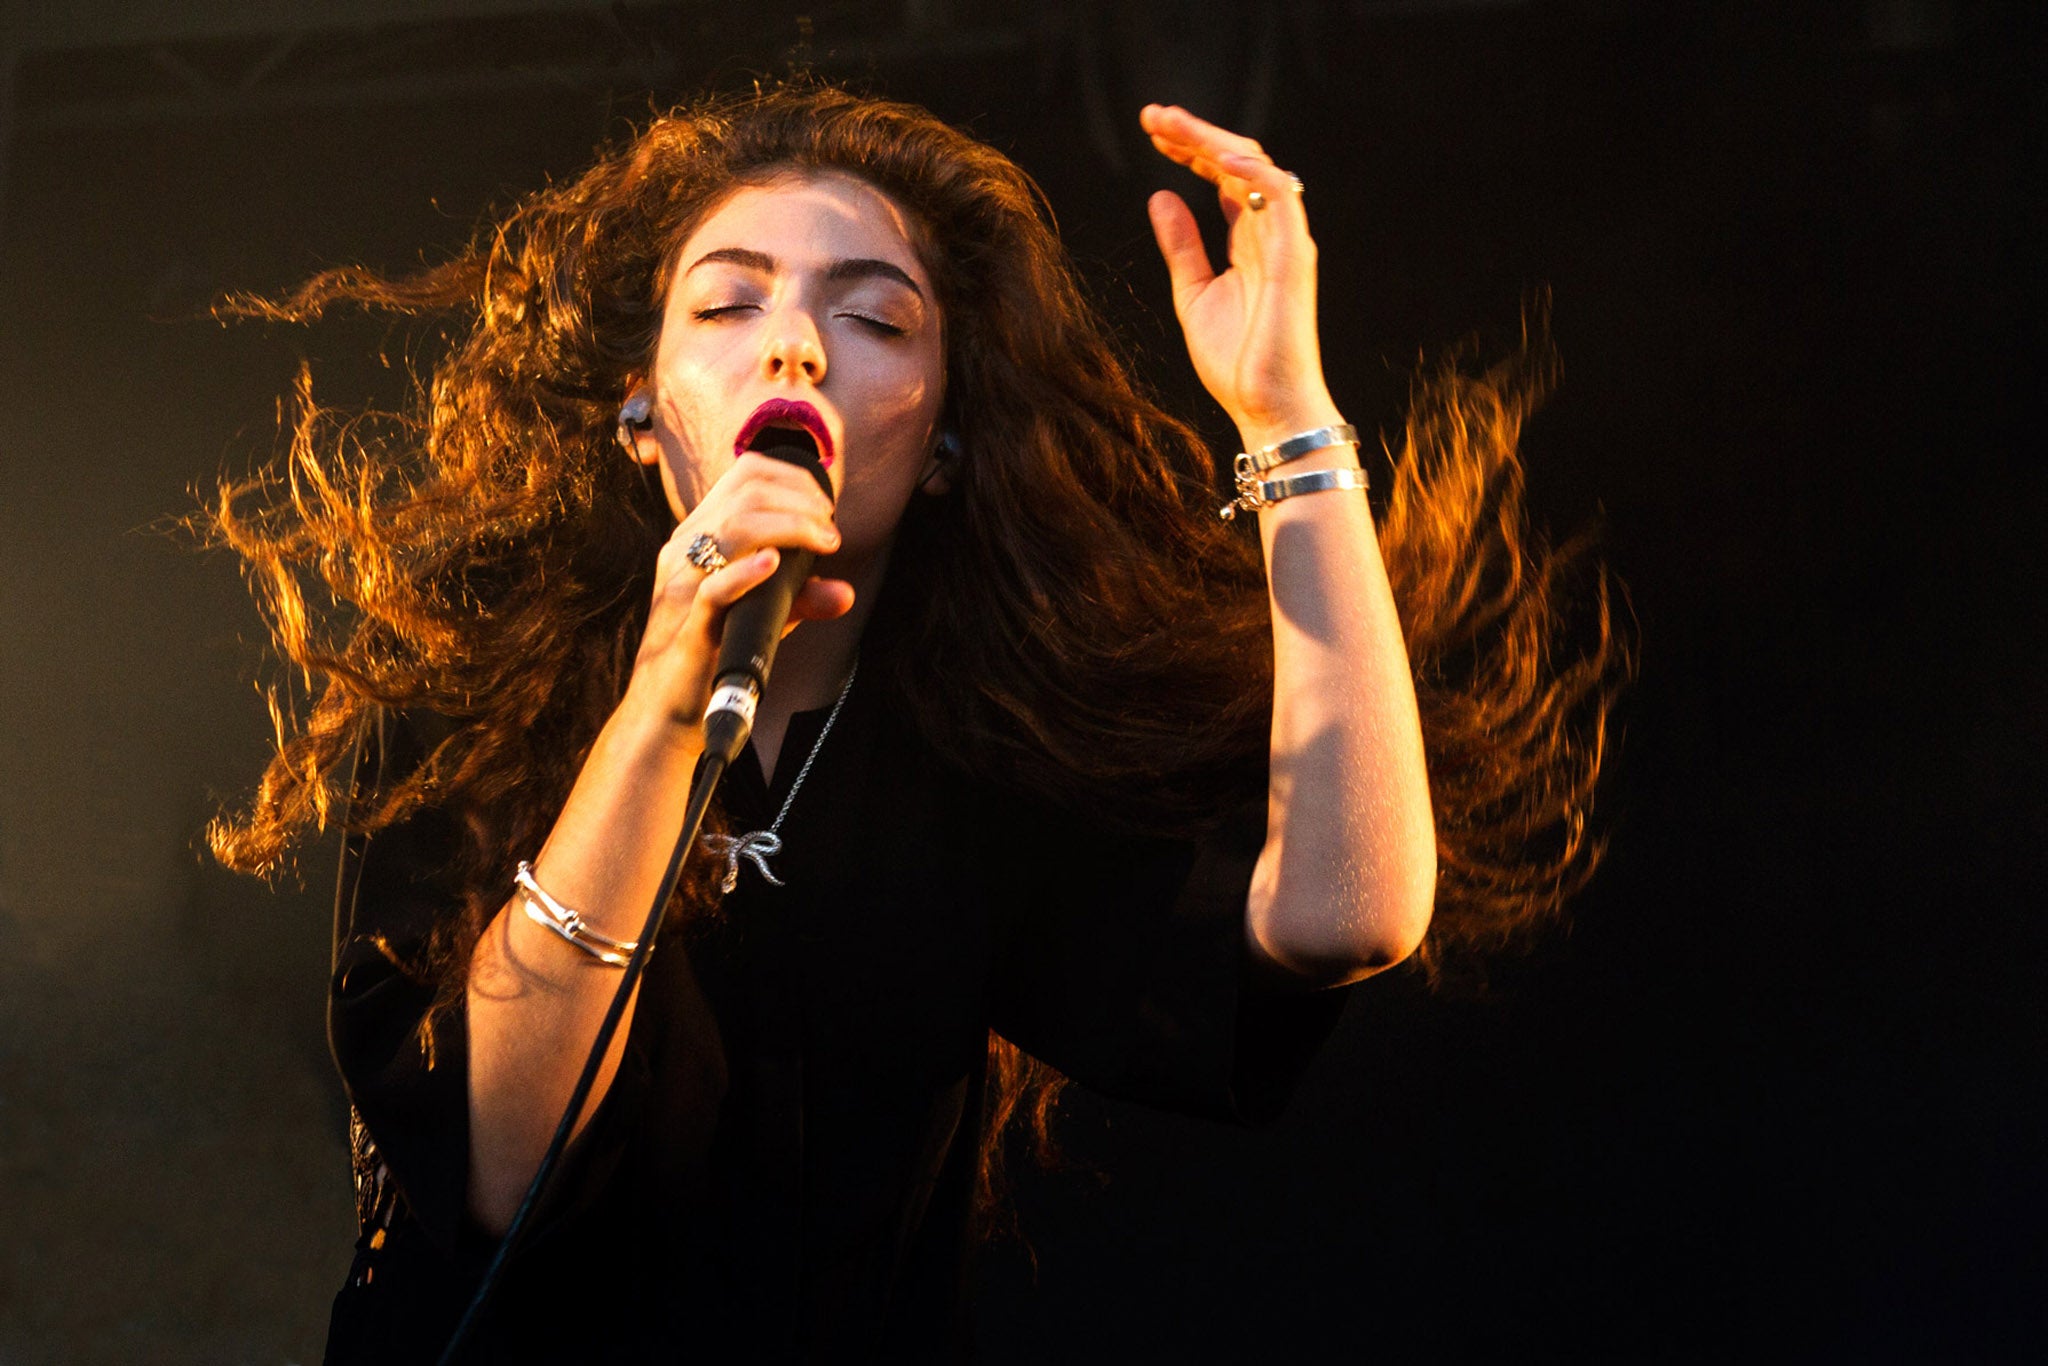 NME Photography Awards 2014: Winning Lorde and Debbie Harry shots go on ...